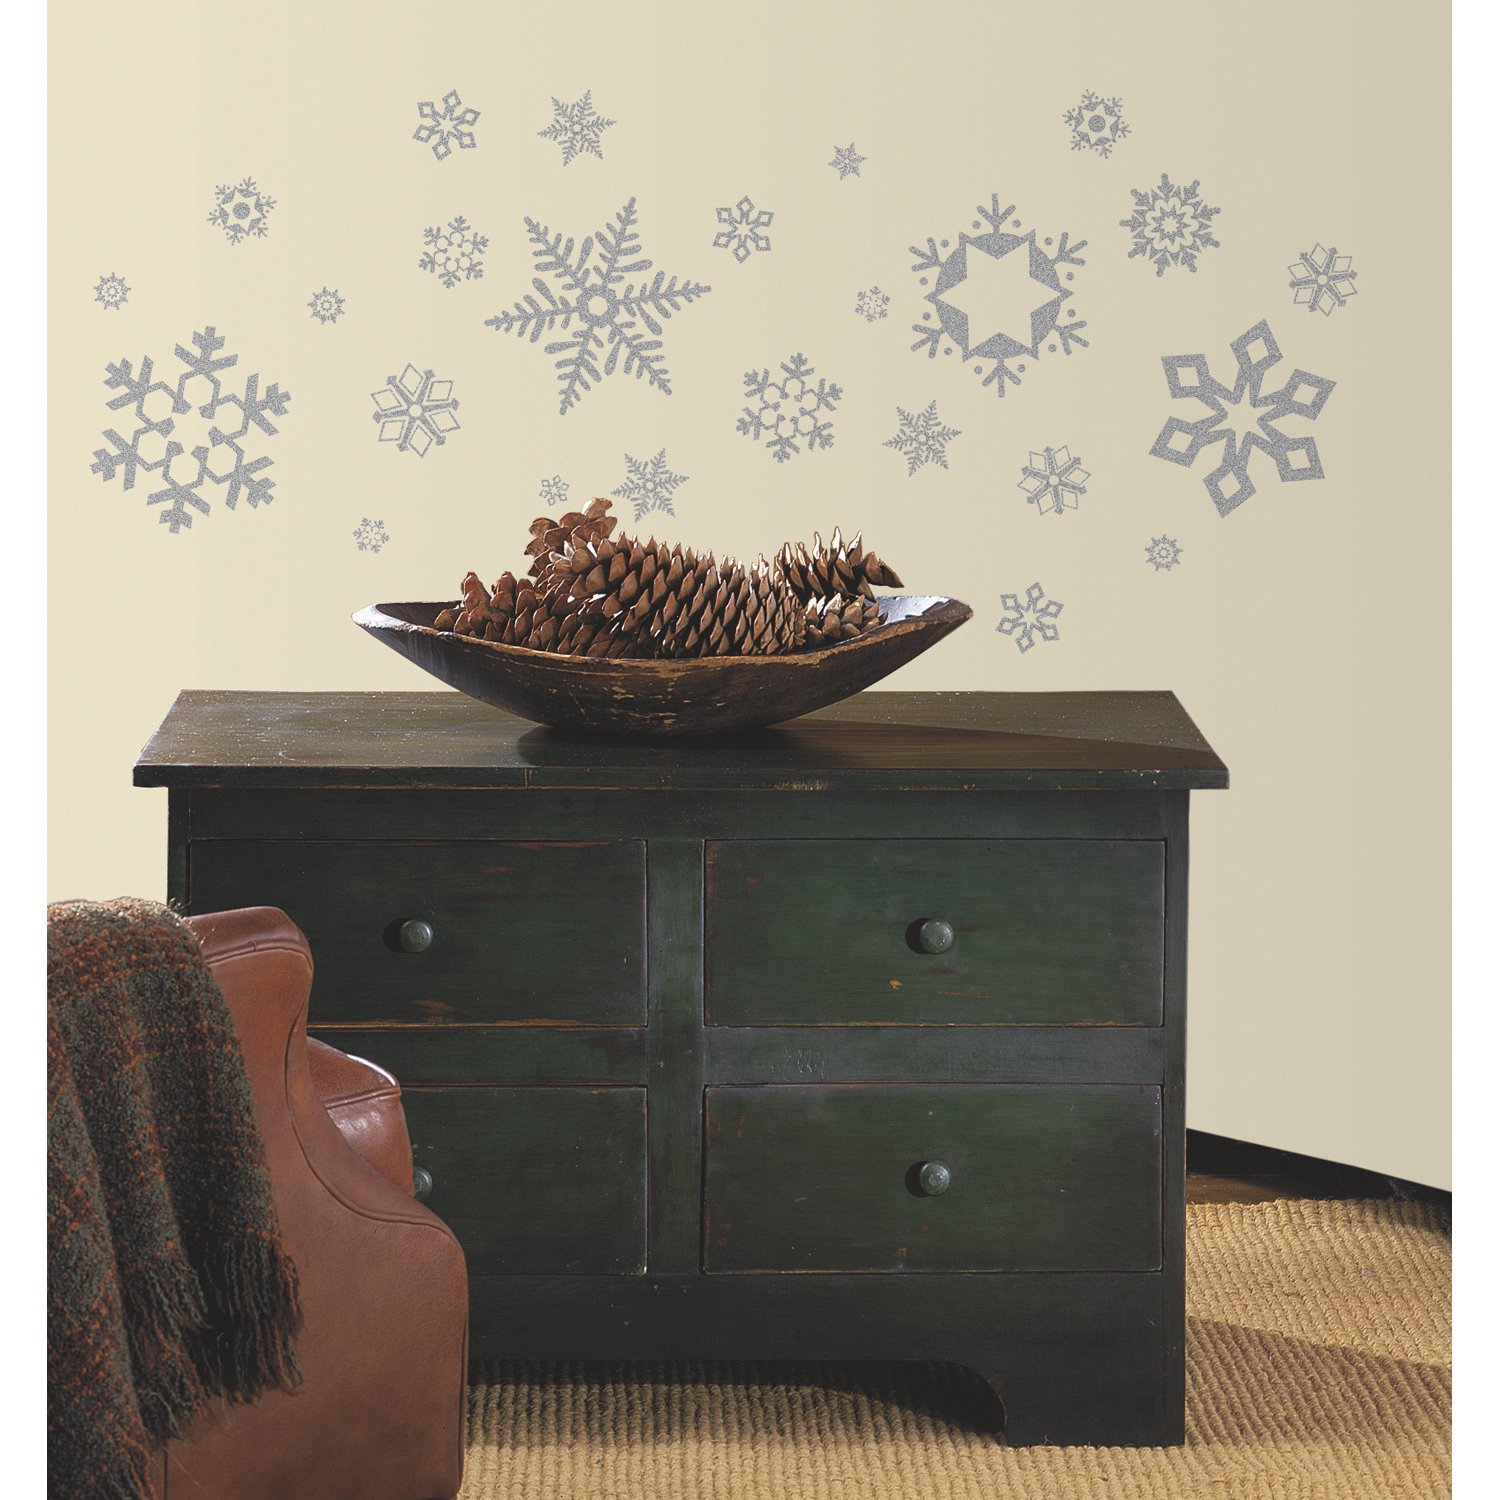 Roommates Glitter Snowflakes Childrens Repositionable Wall Stickers, Multi